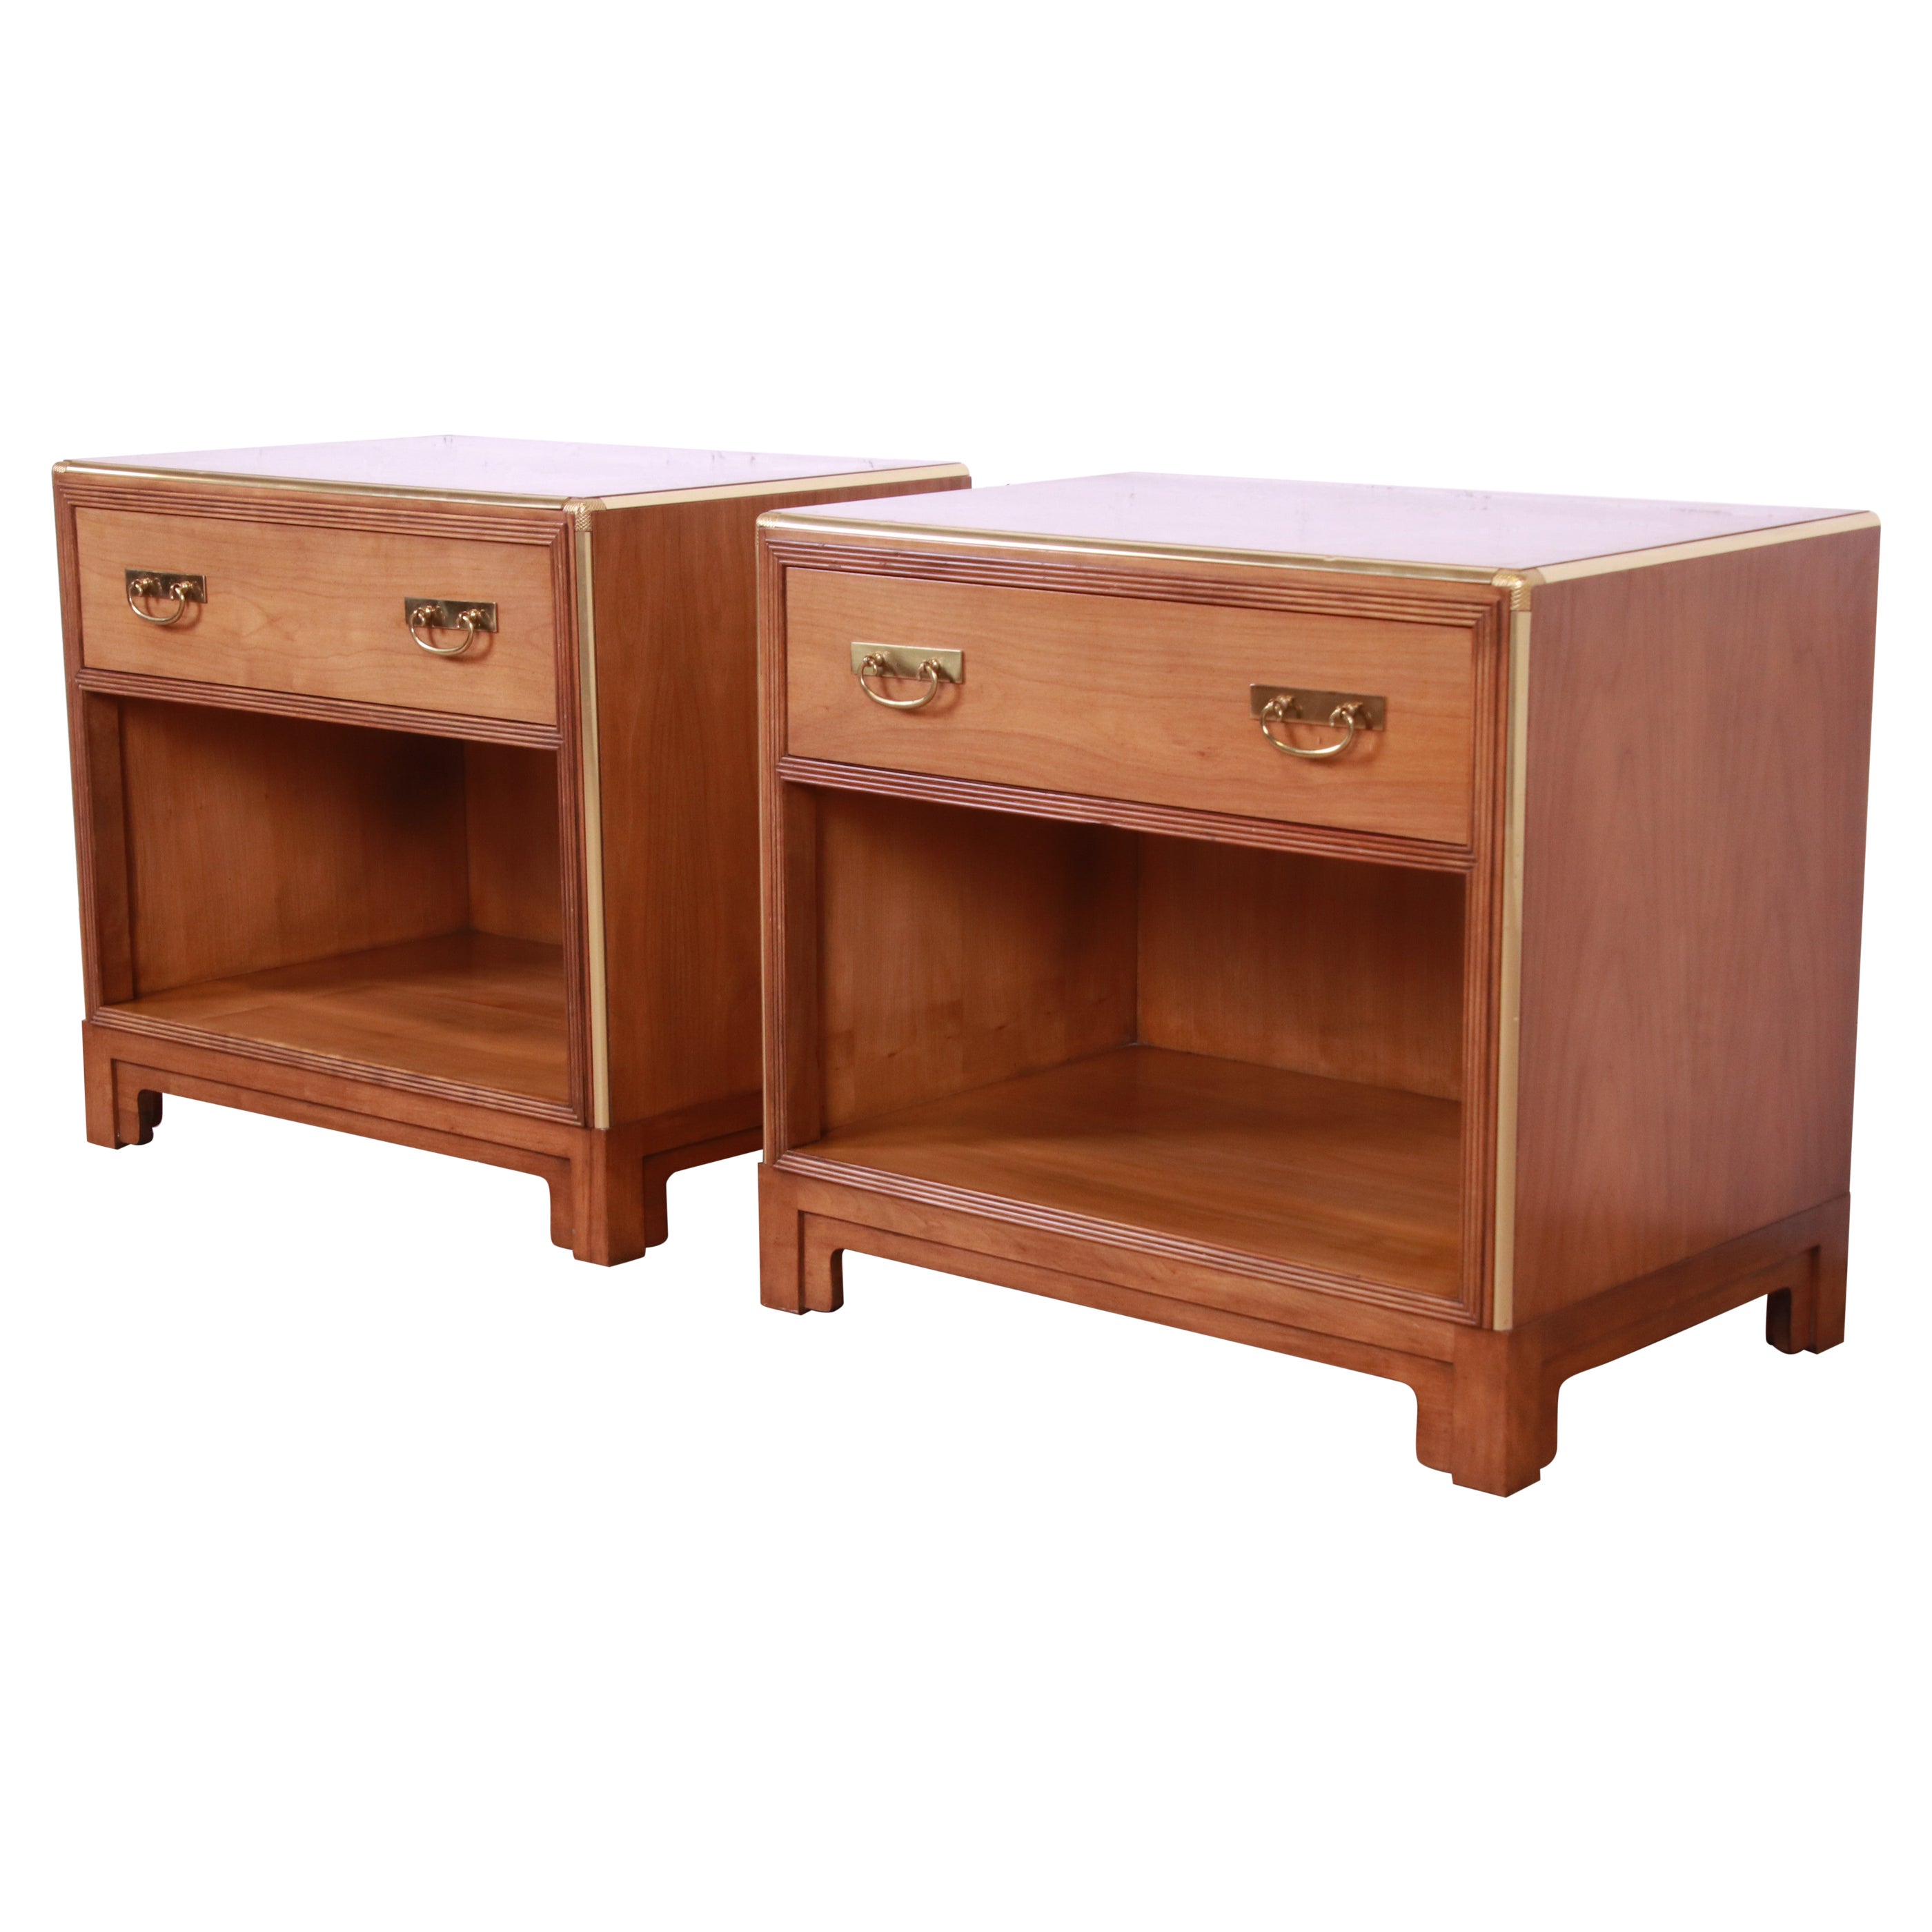 Michael Taylor for Baker Mid-Century Modern Cherry and Brass Nightstands, Pair